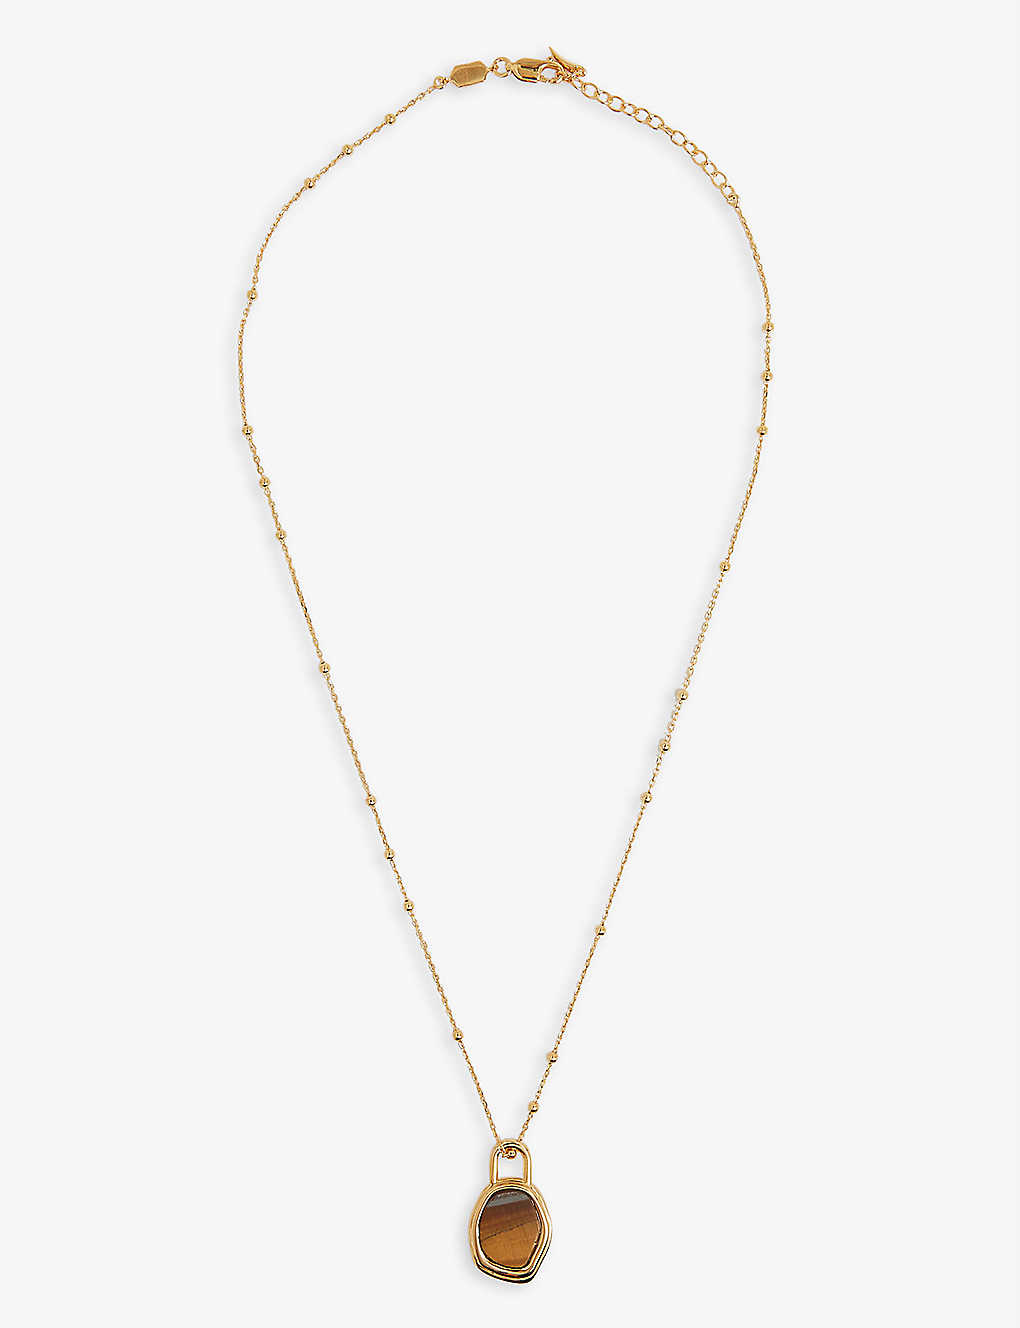 Dolce & Gabbana Gold Leaf Brass Pendant White Pearl Necklace